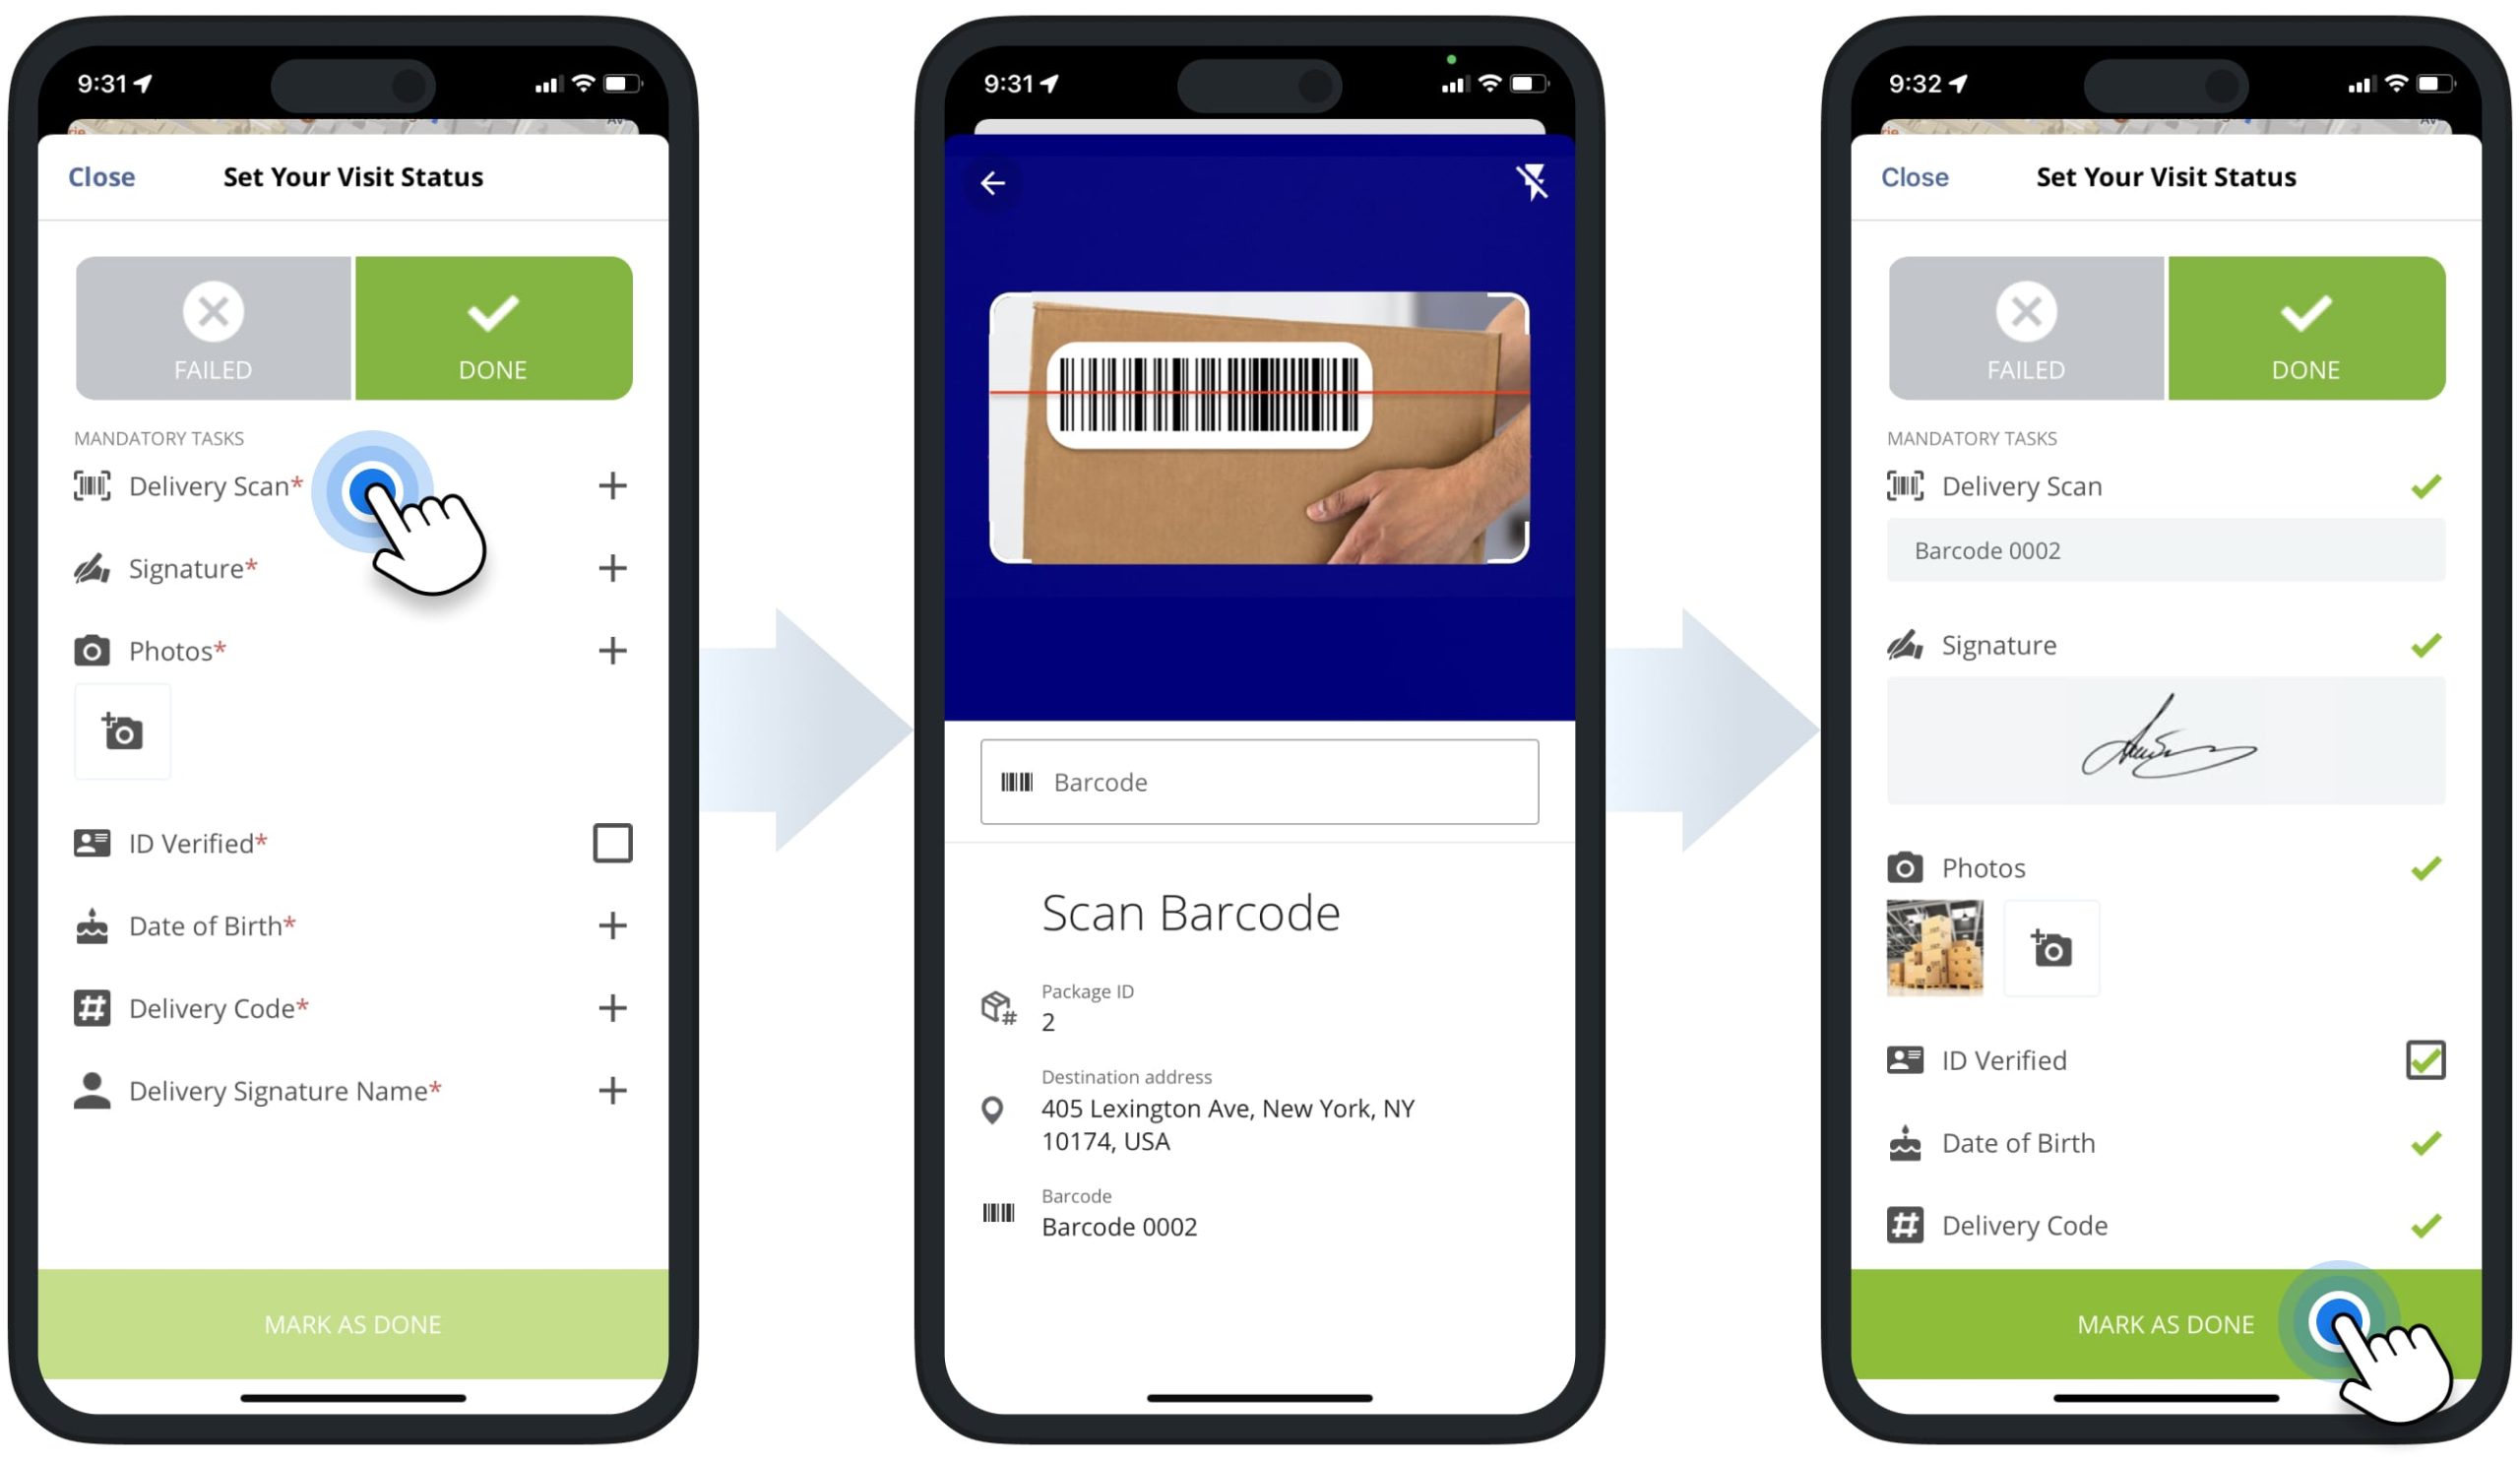 Set the Done stop status, scan the unloading barcode, and attach e-signature, image, and other POD to unload the order and complete delivery.